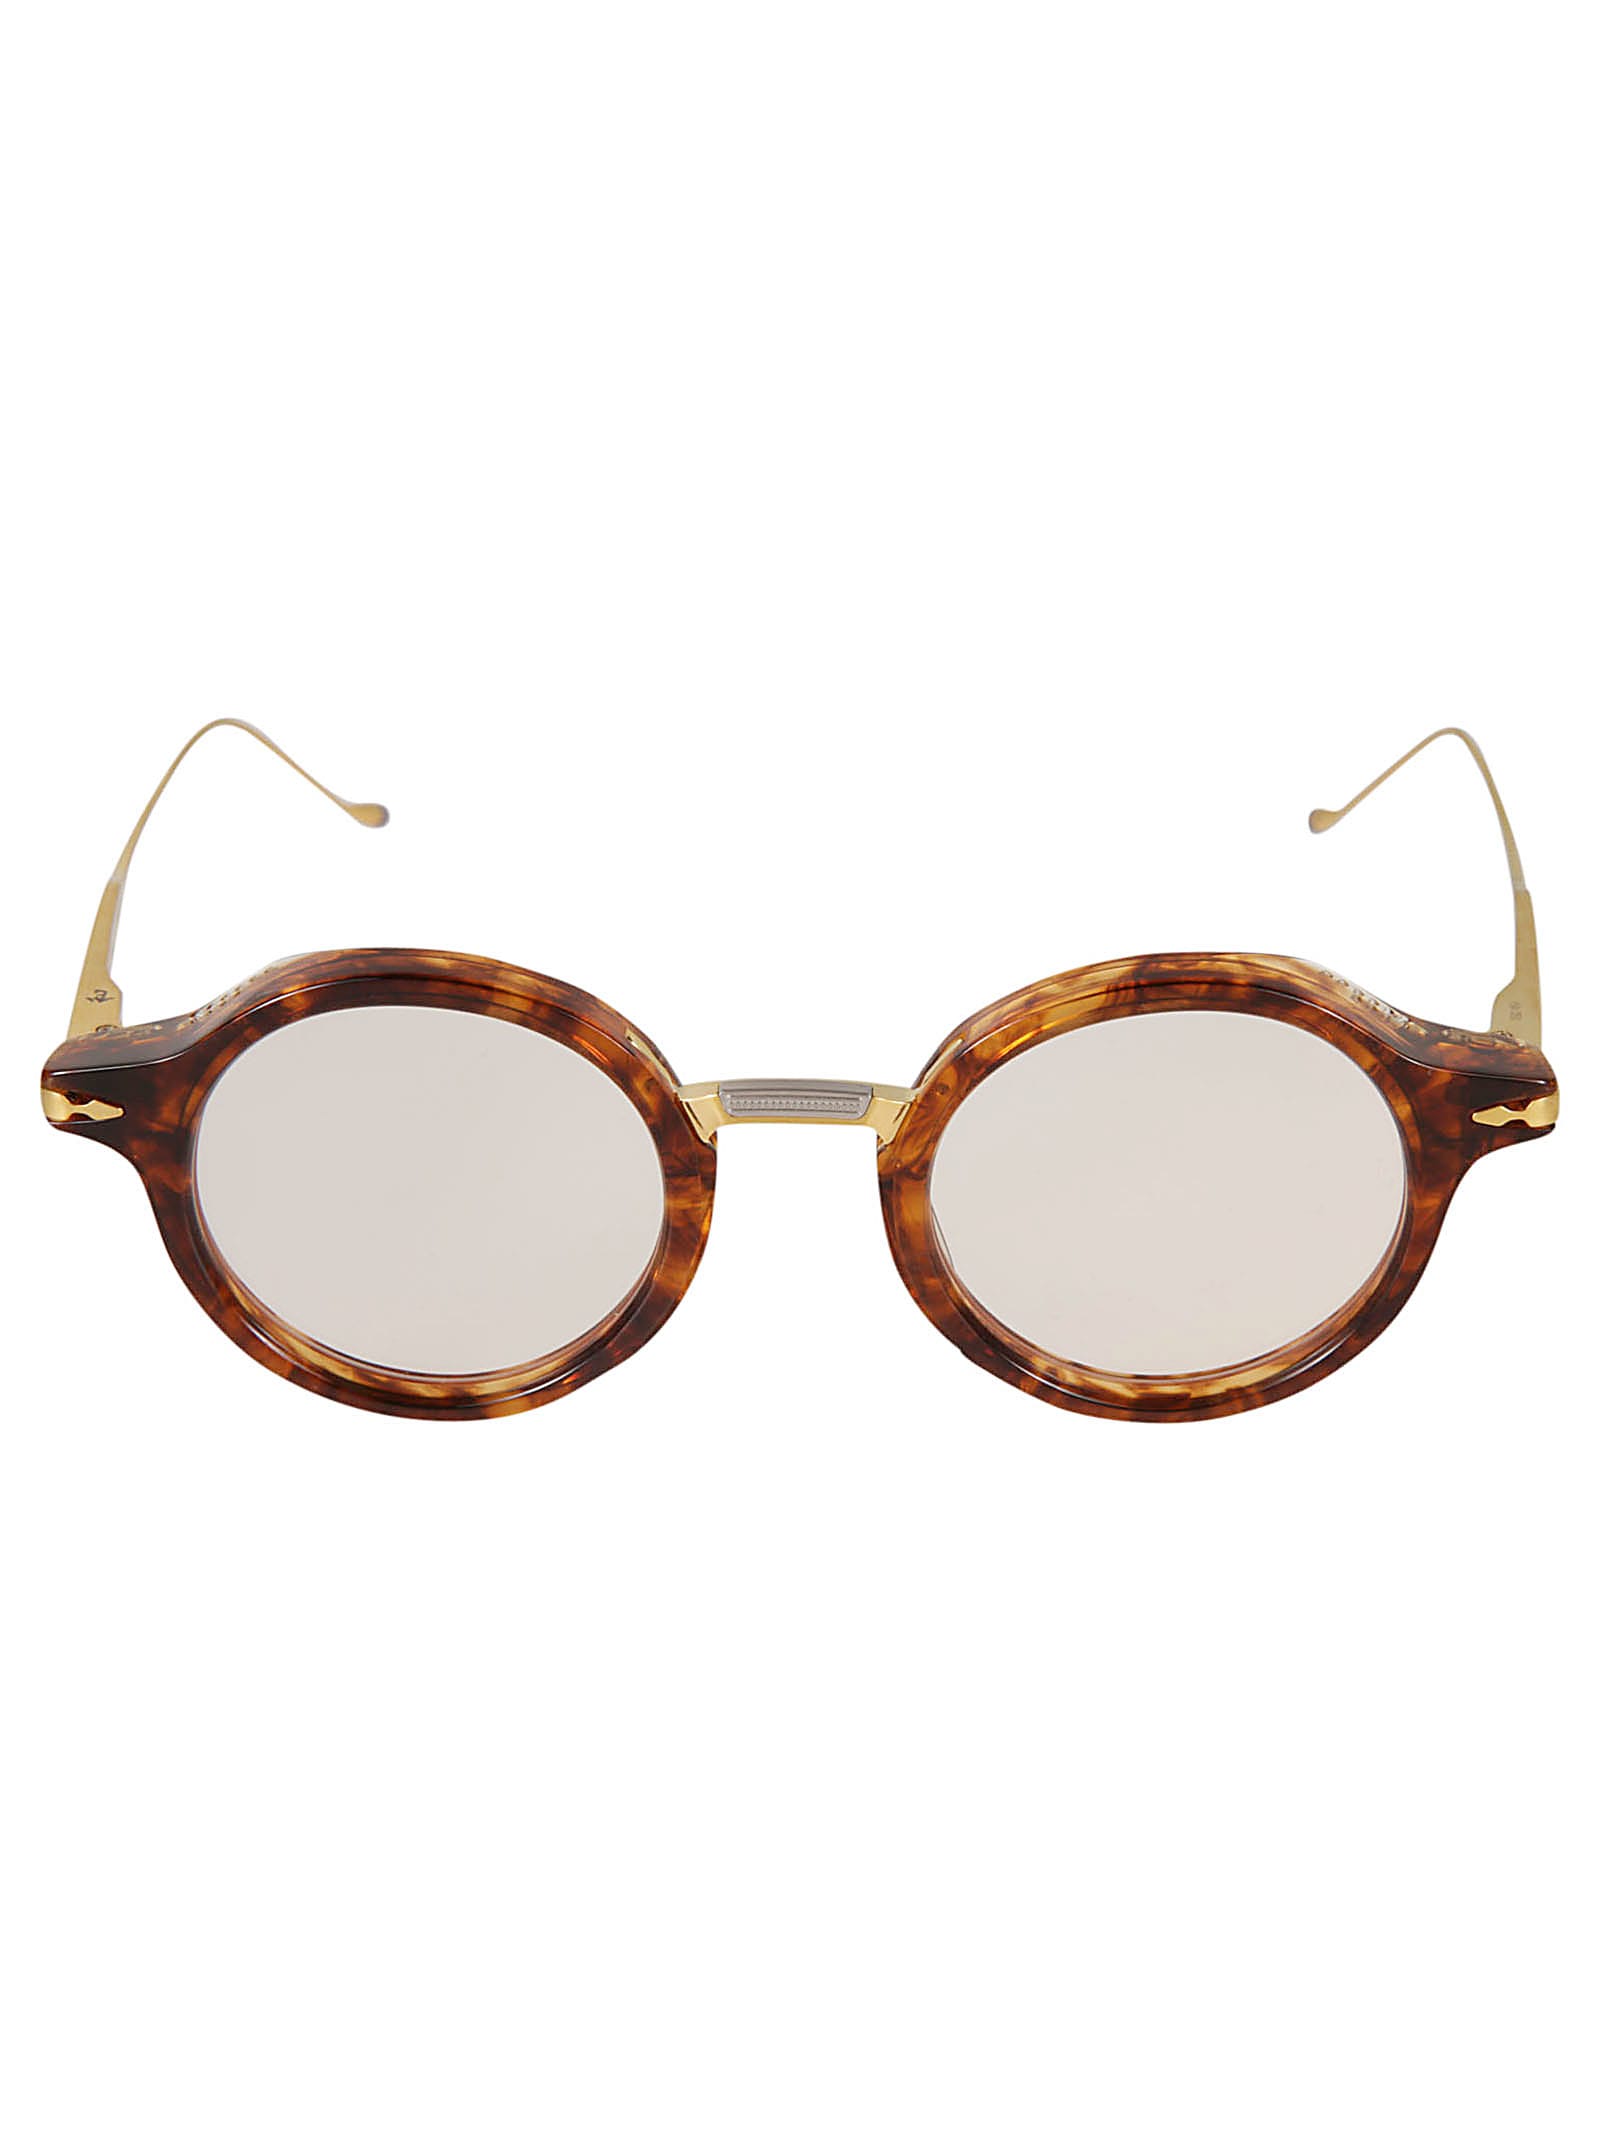 Jacques Marie Mage Norman Frame In Argyle